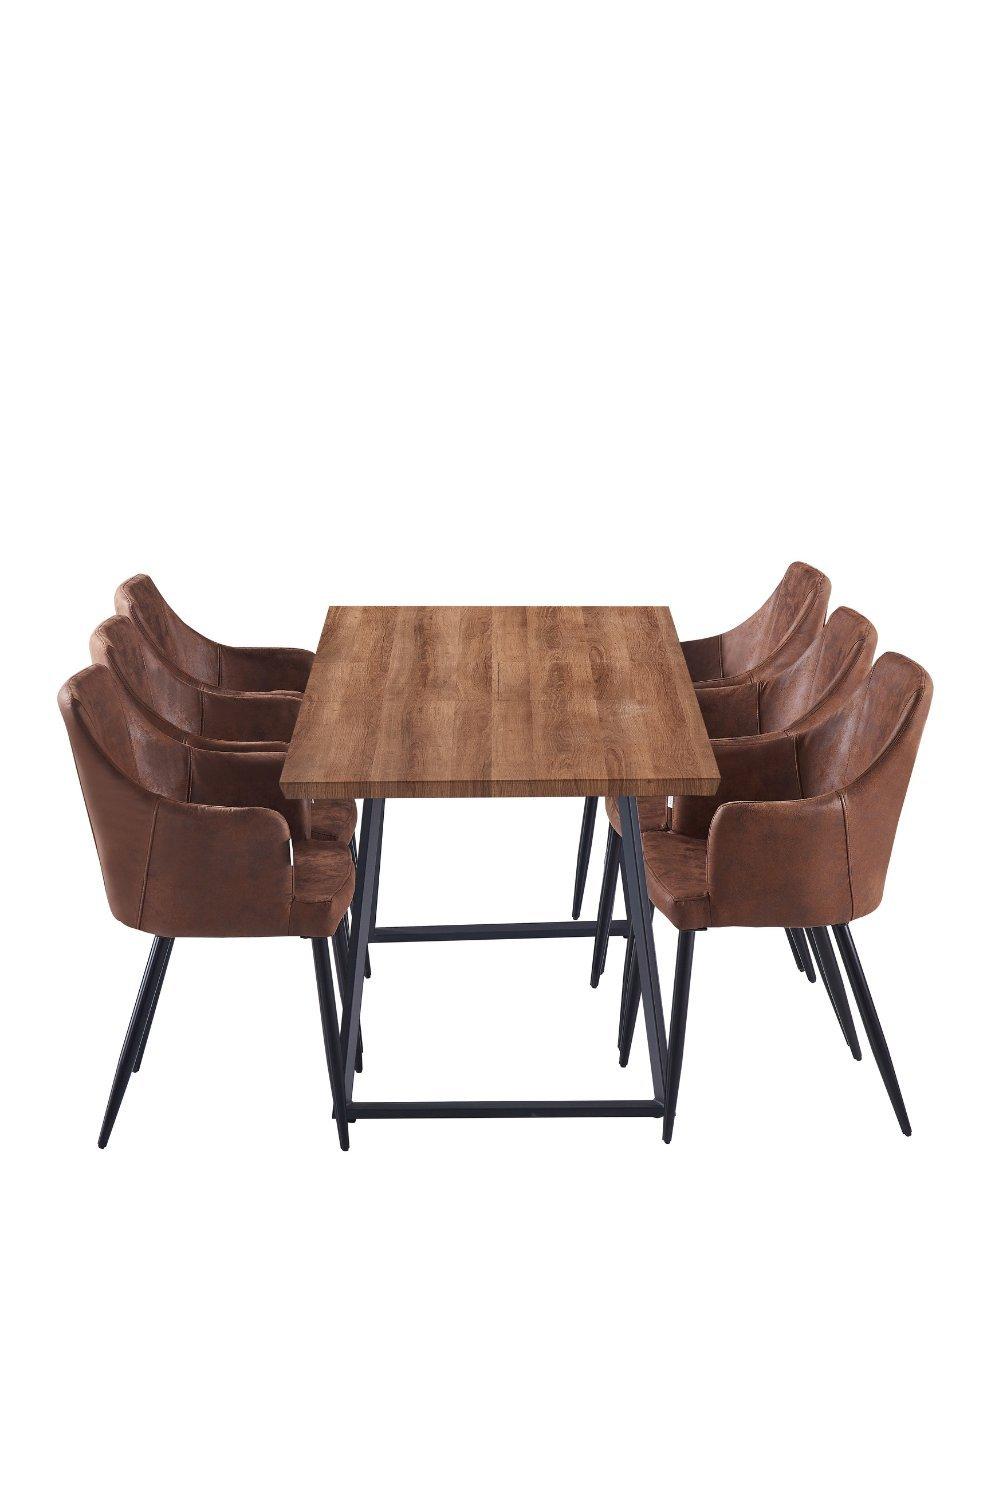 'Zarah Toga' LUX Dining Set with a Table & 6 Chairs